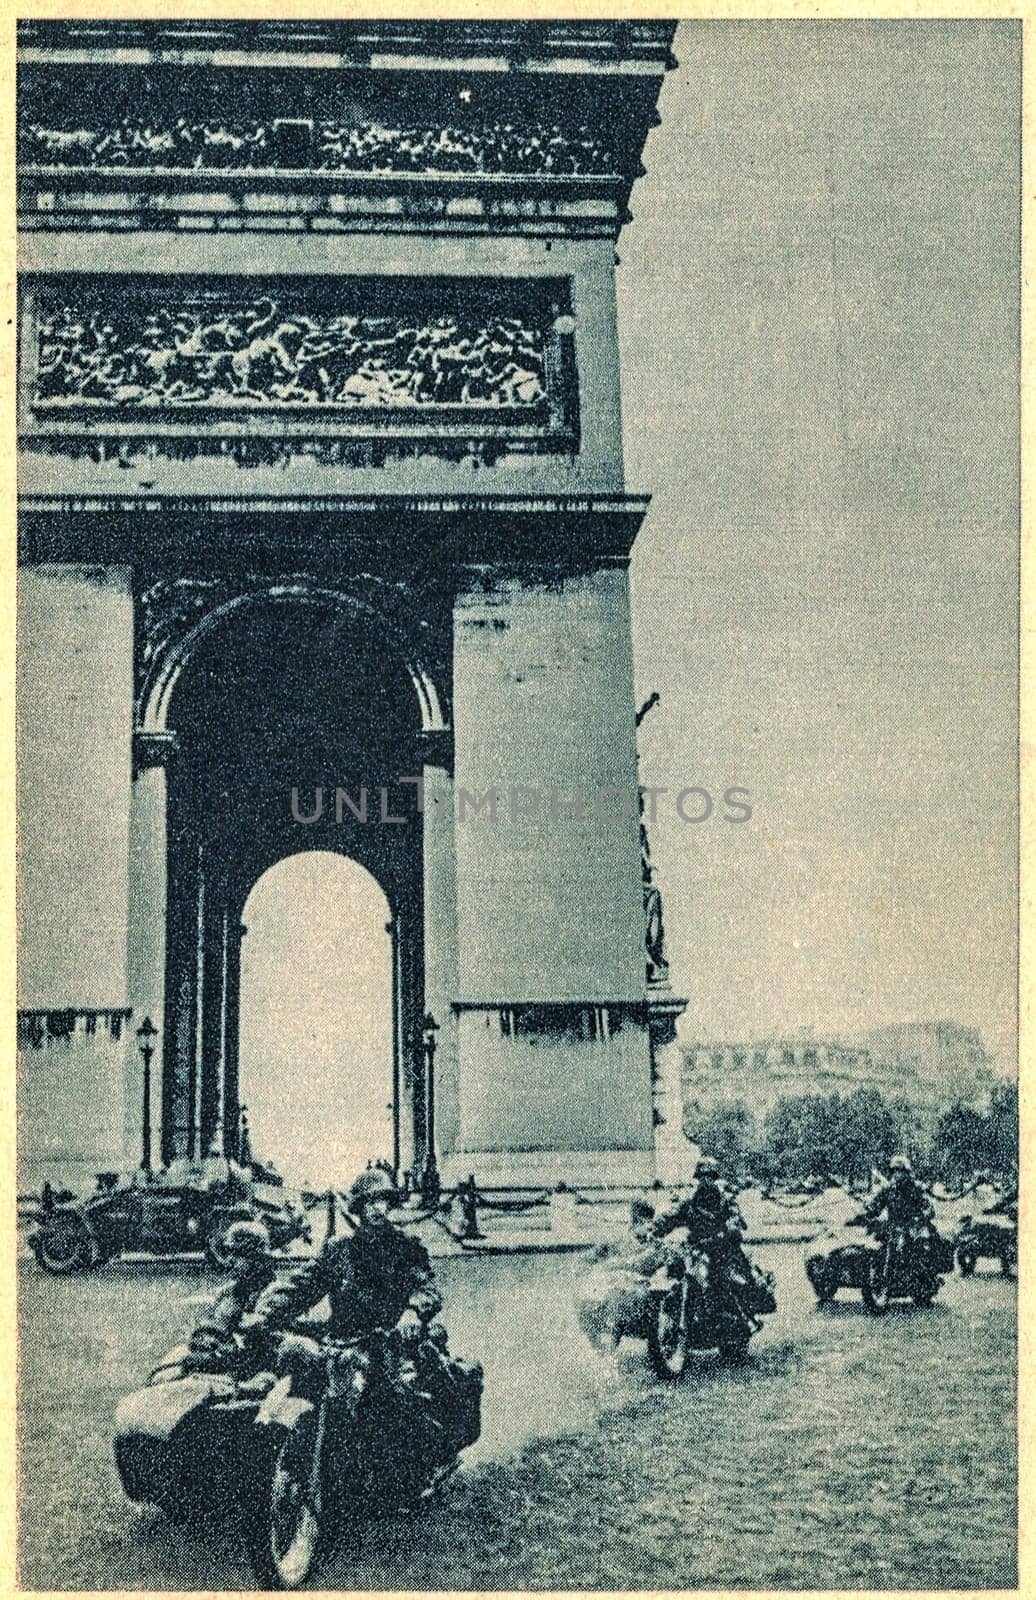 German troops ride around Arc de Triomphe in Paris. Nazi Germany invaded in France in 1940. by roman_nerud